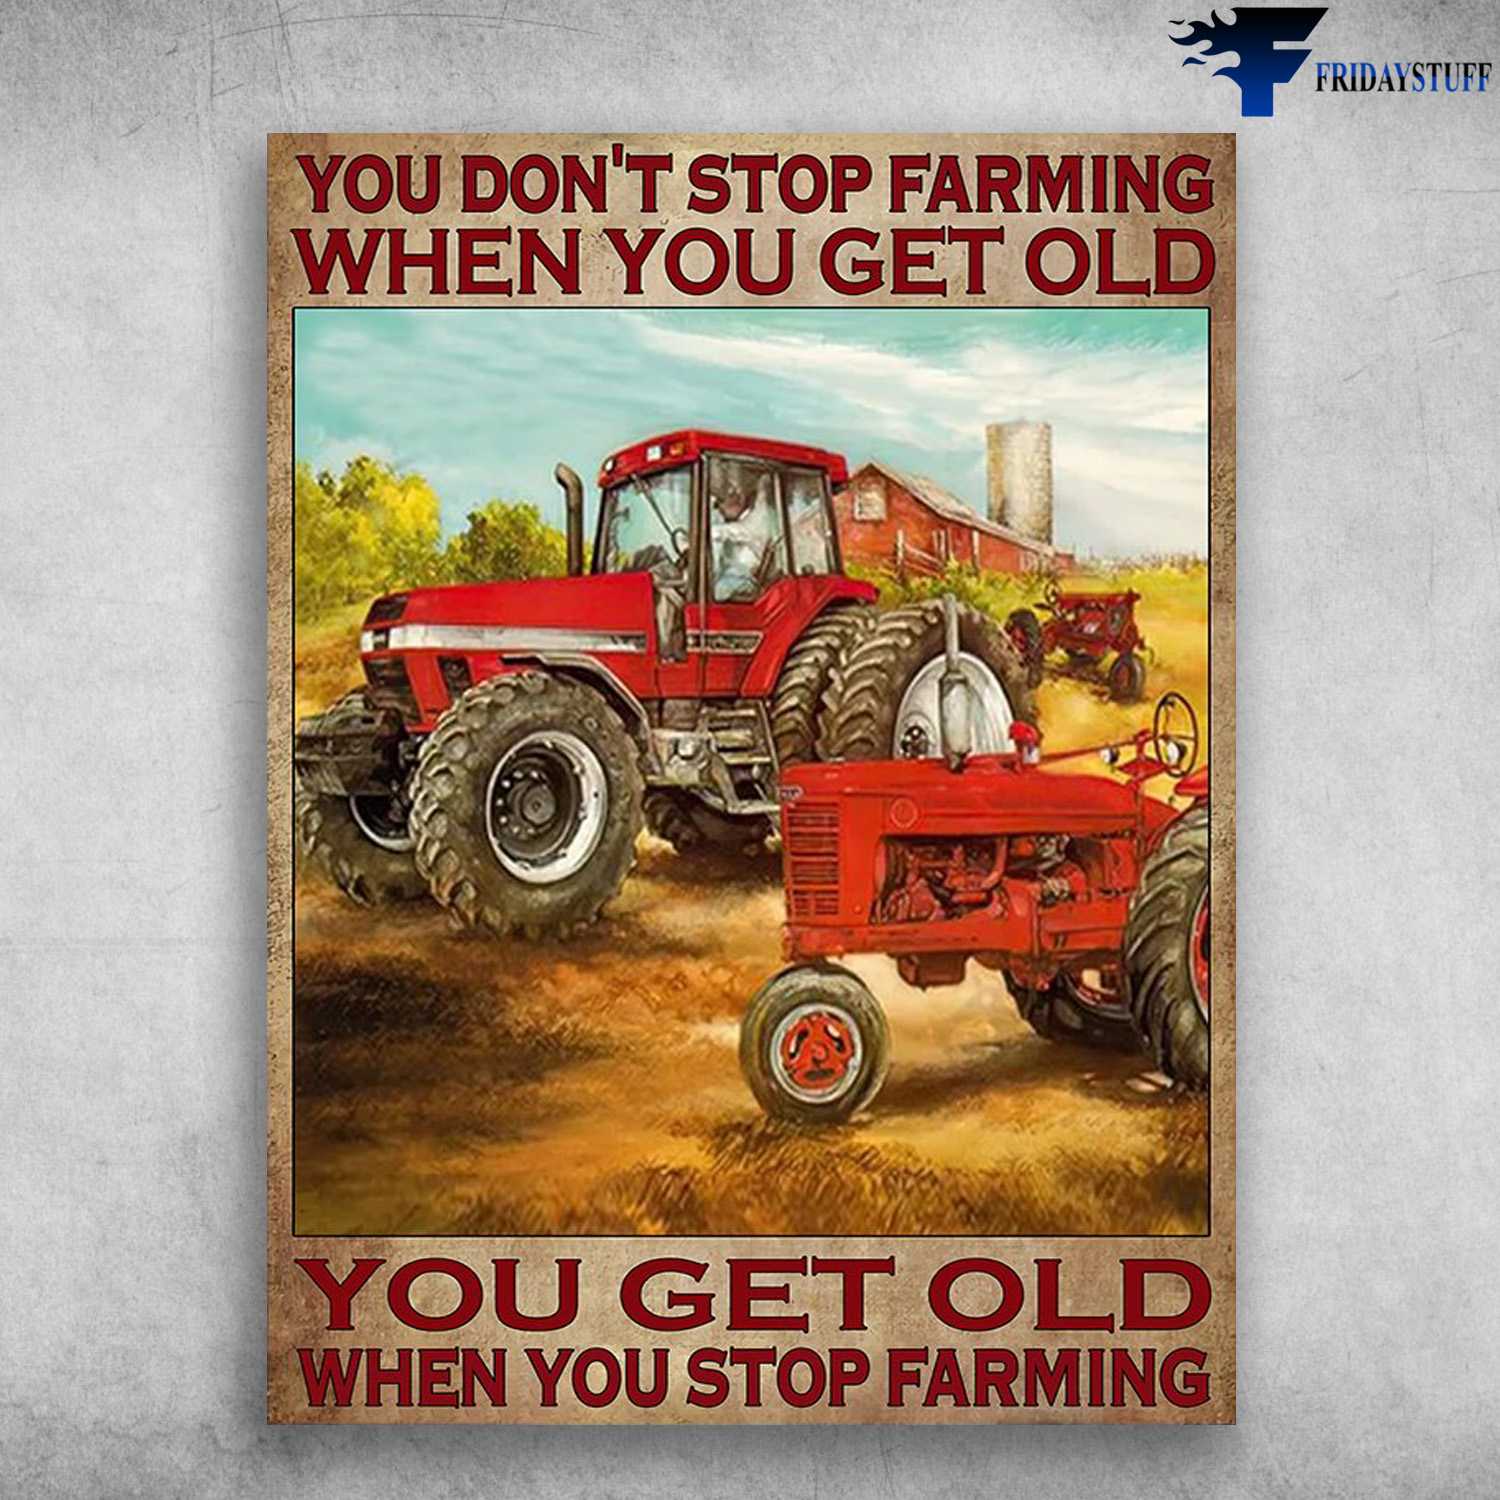 Farmer Poster, Farm Tractor - You Don't Stop Farming When You Get Old, You Get Old When You Stop Farming